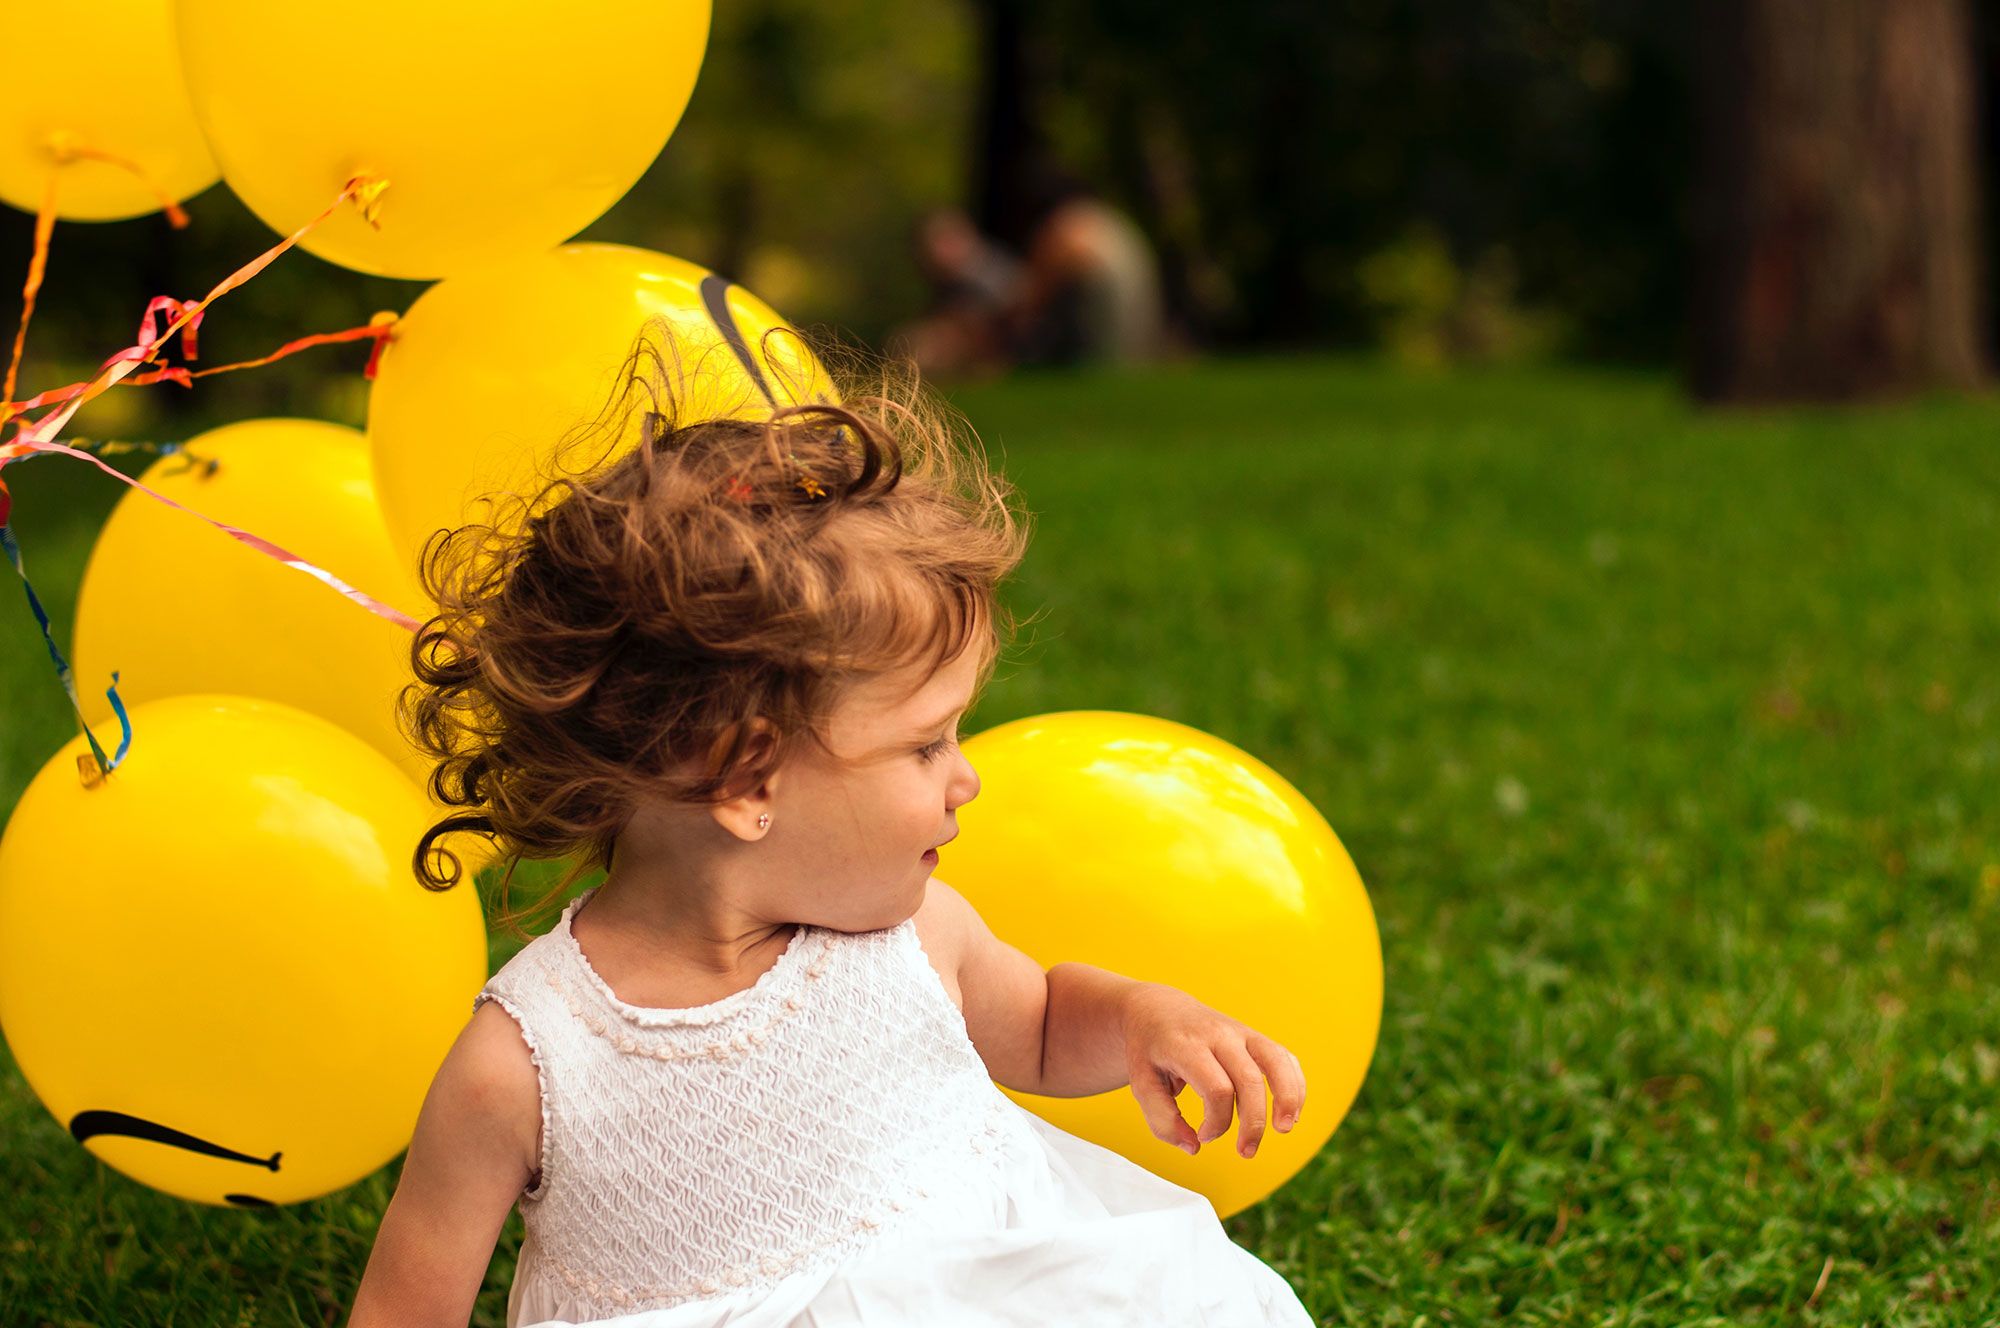 People in nature, Child, Yellow, Balloon, Party supply, Toddler, Grass, Fun, Smile, Happy, 